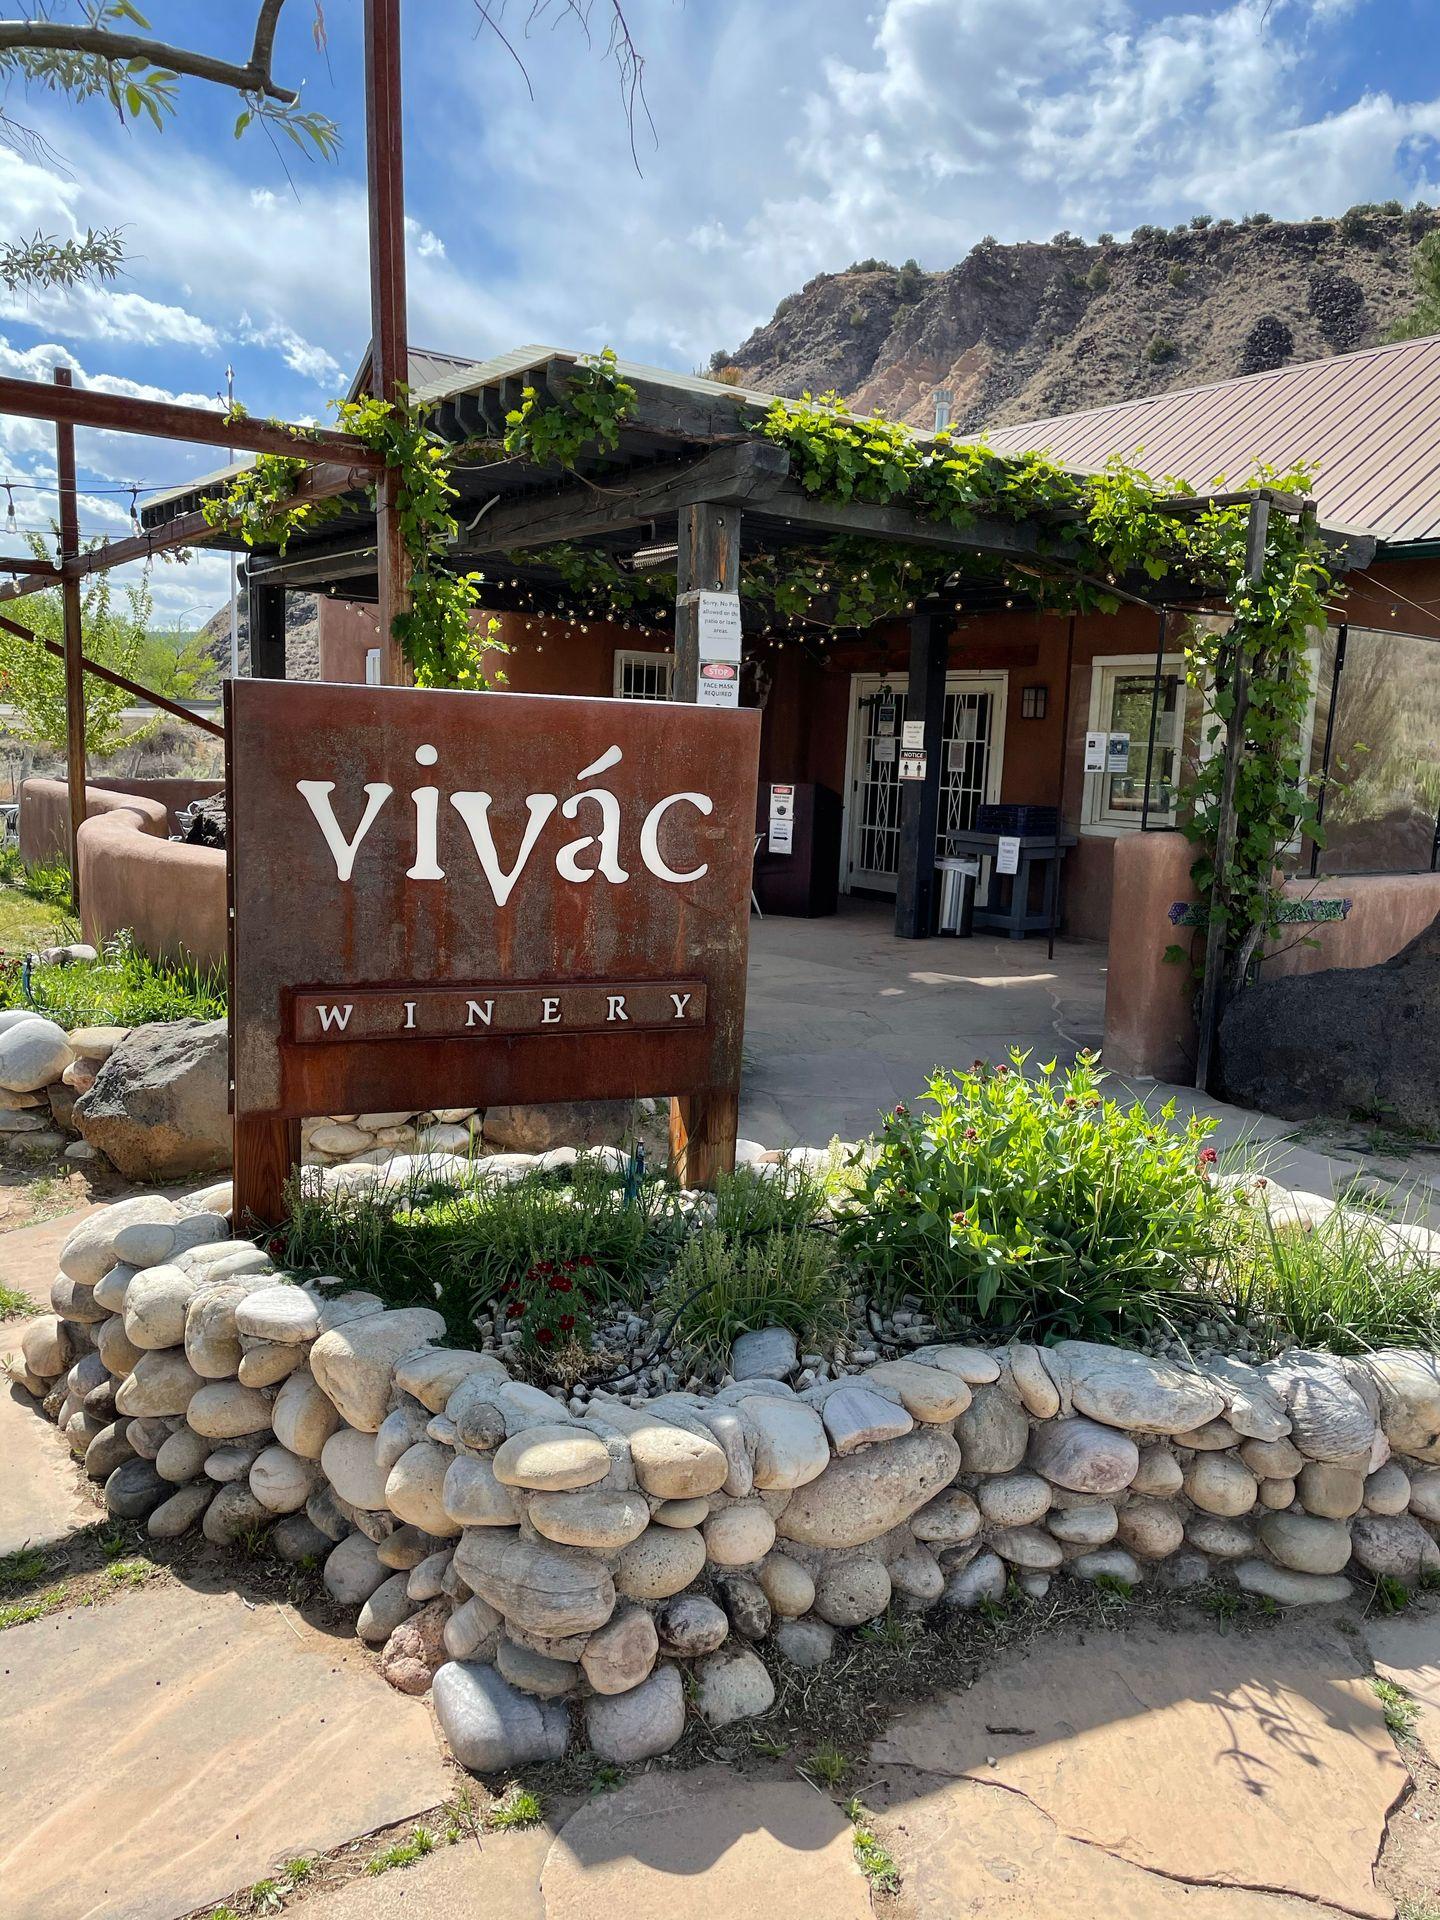 The exterior of Vivac Winery. There is a sign, greenery behind a stone wall and an overhang with hanging green vines.